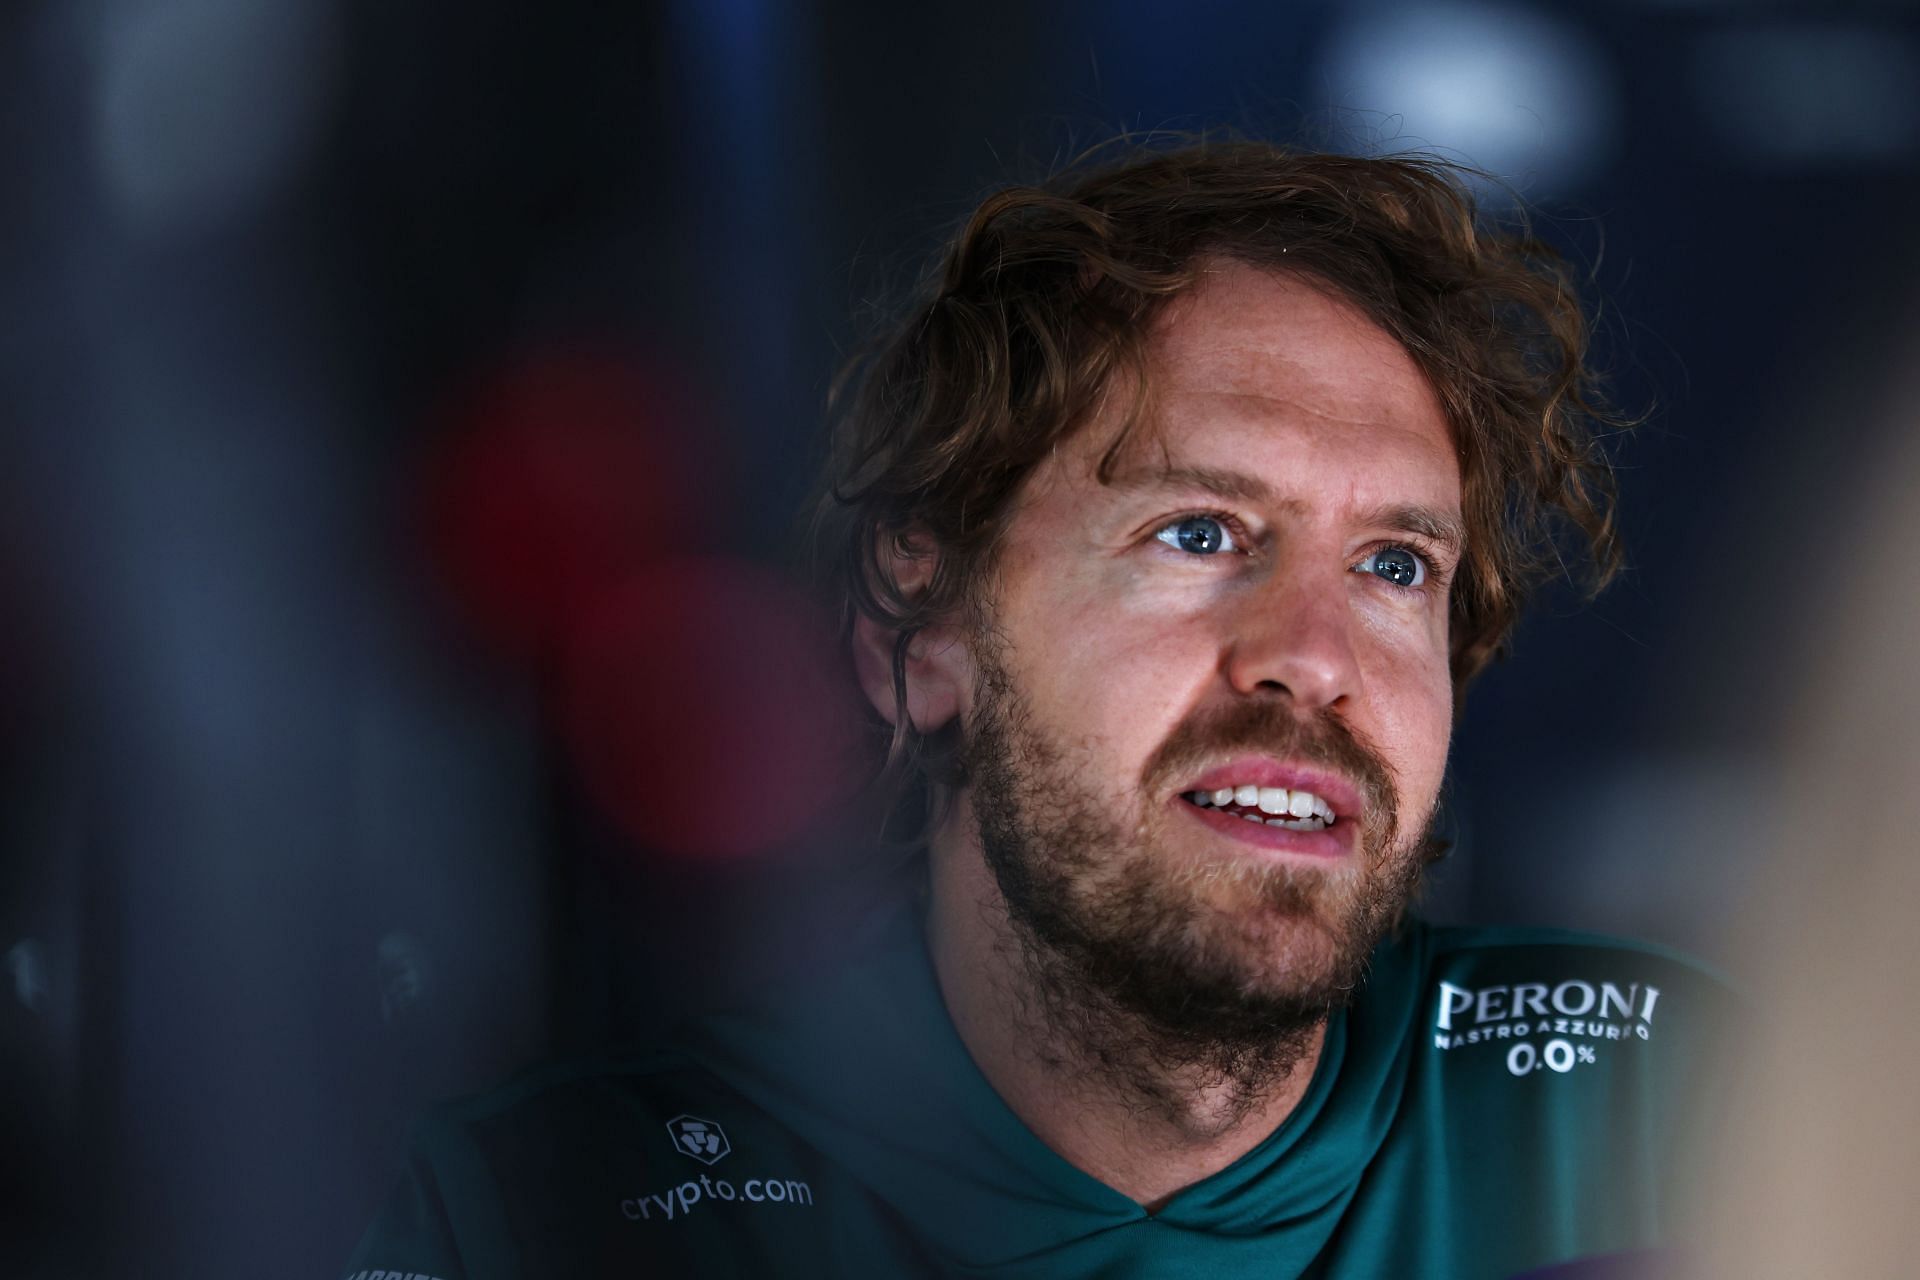 Sebastian Vettel advocated life bans for F1 fans found guilty of abusive behavior in the stands